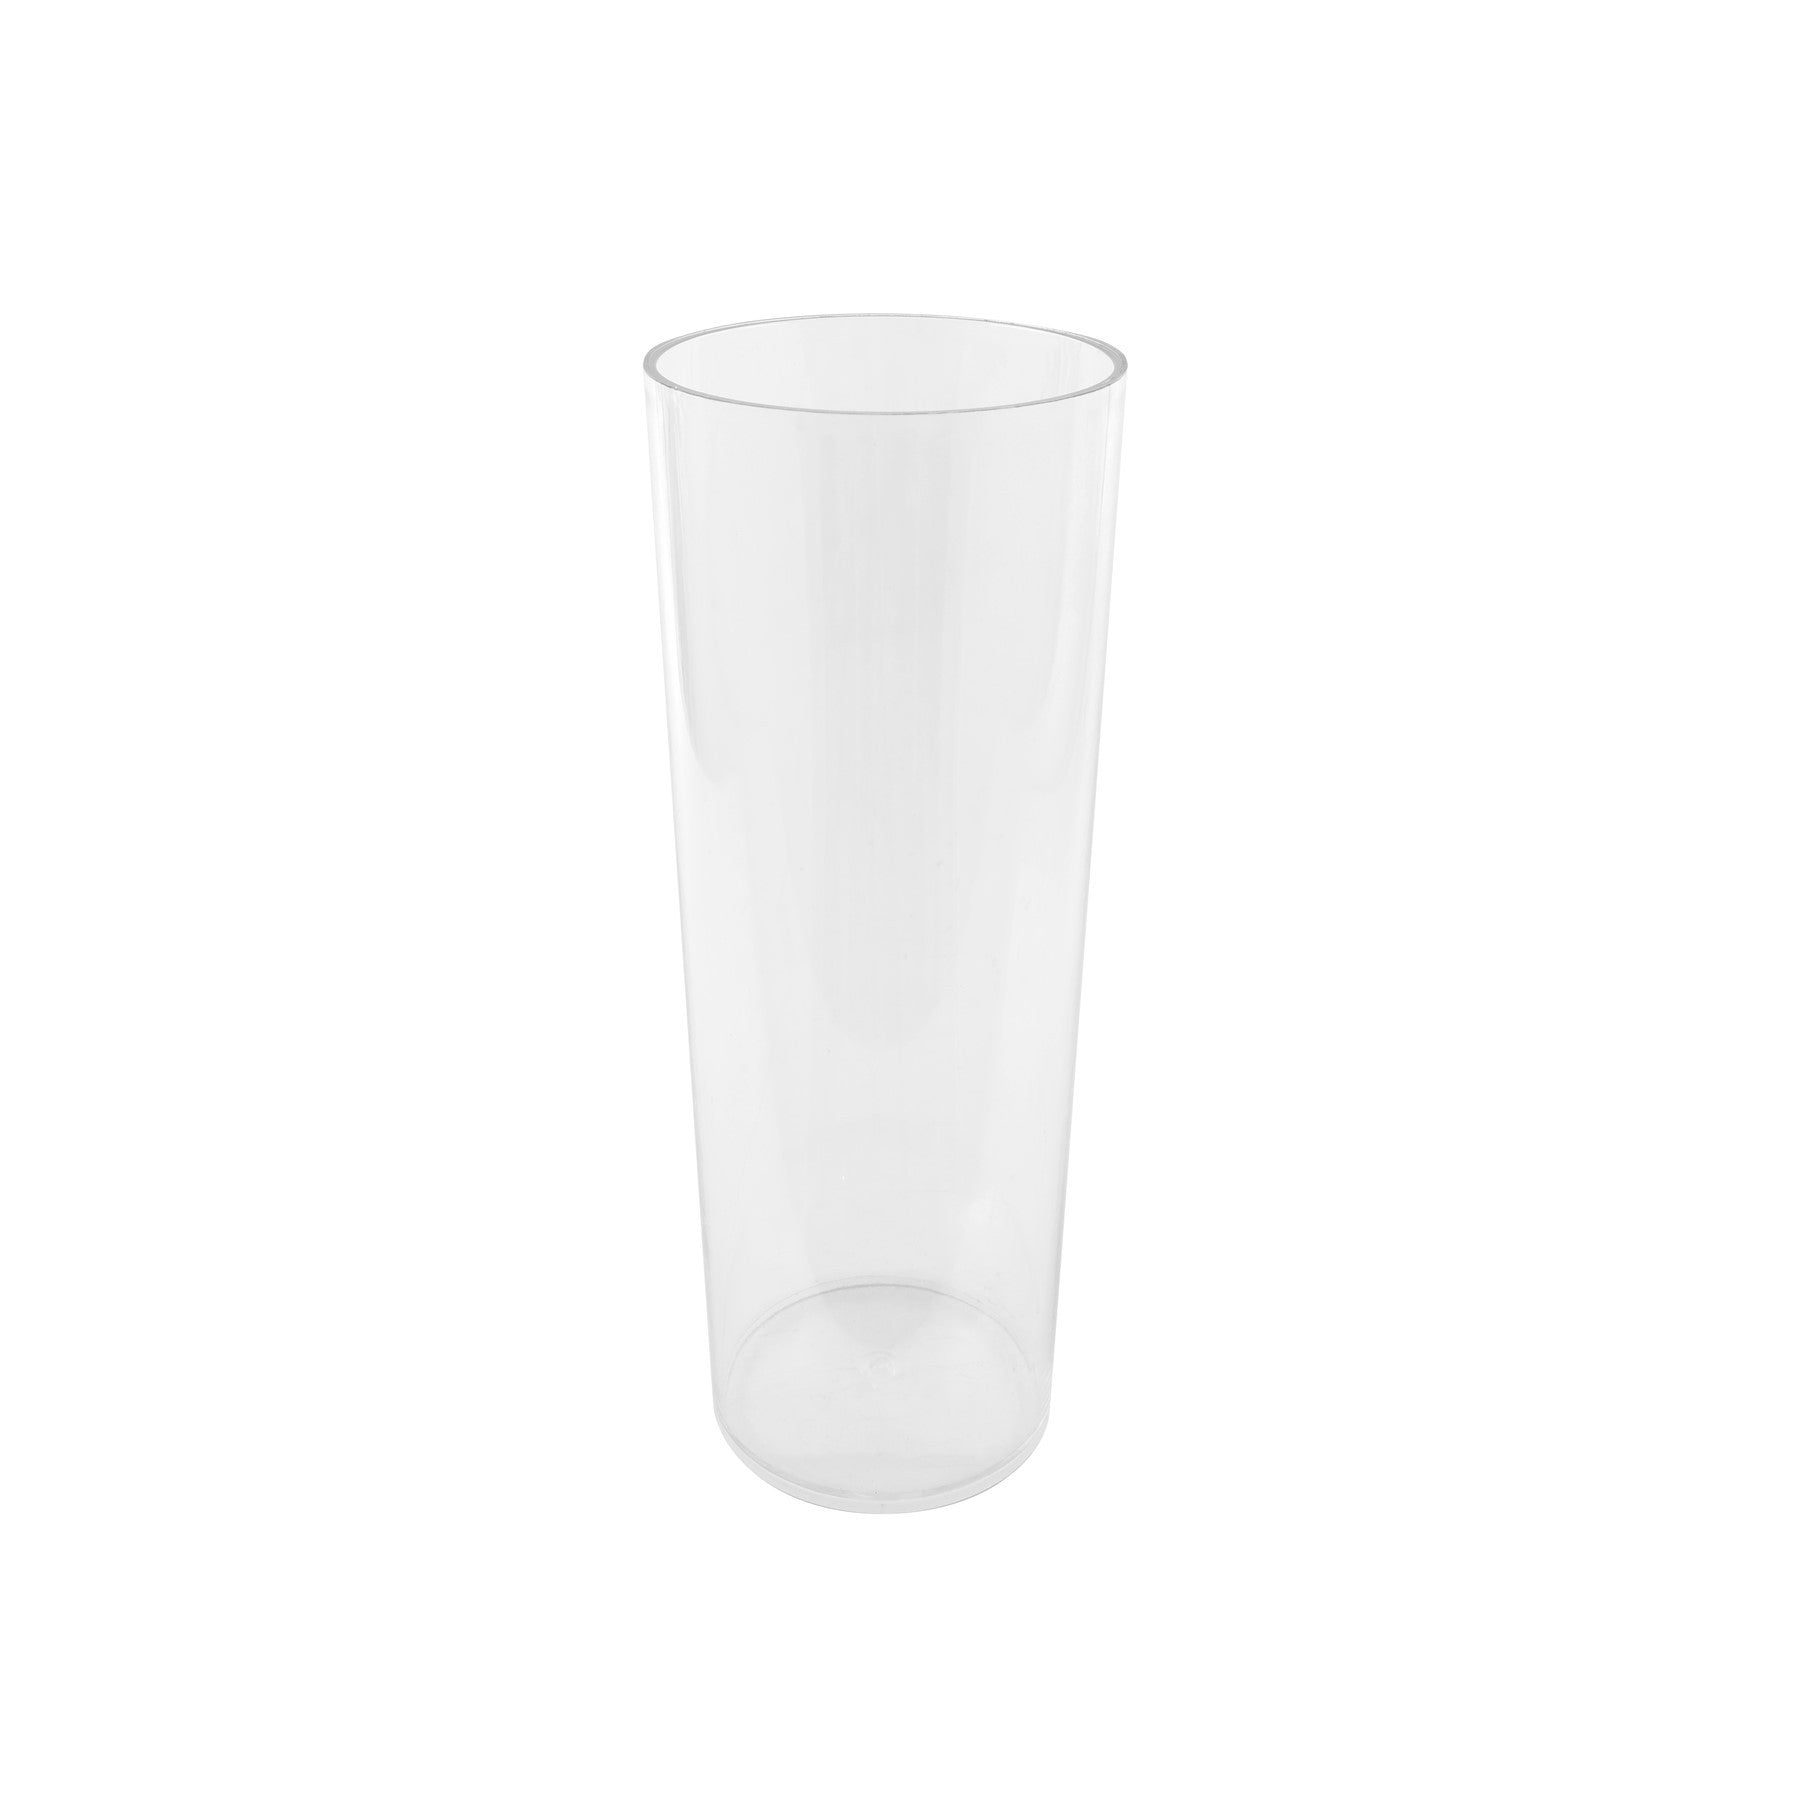 View Clear Acrylic Cylinder Dia16 x H43cm information